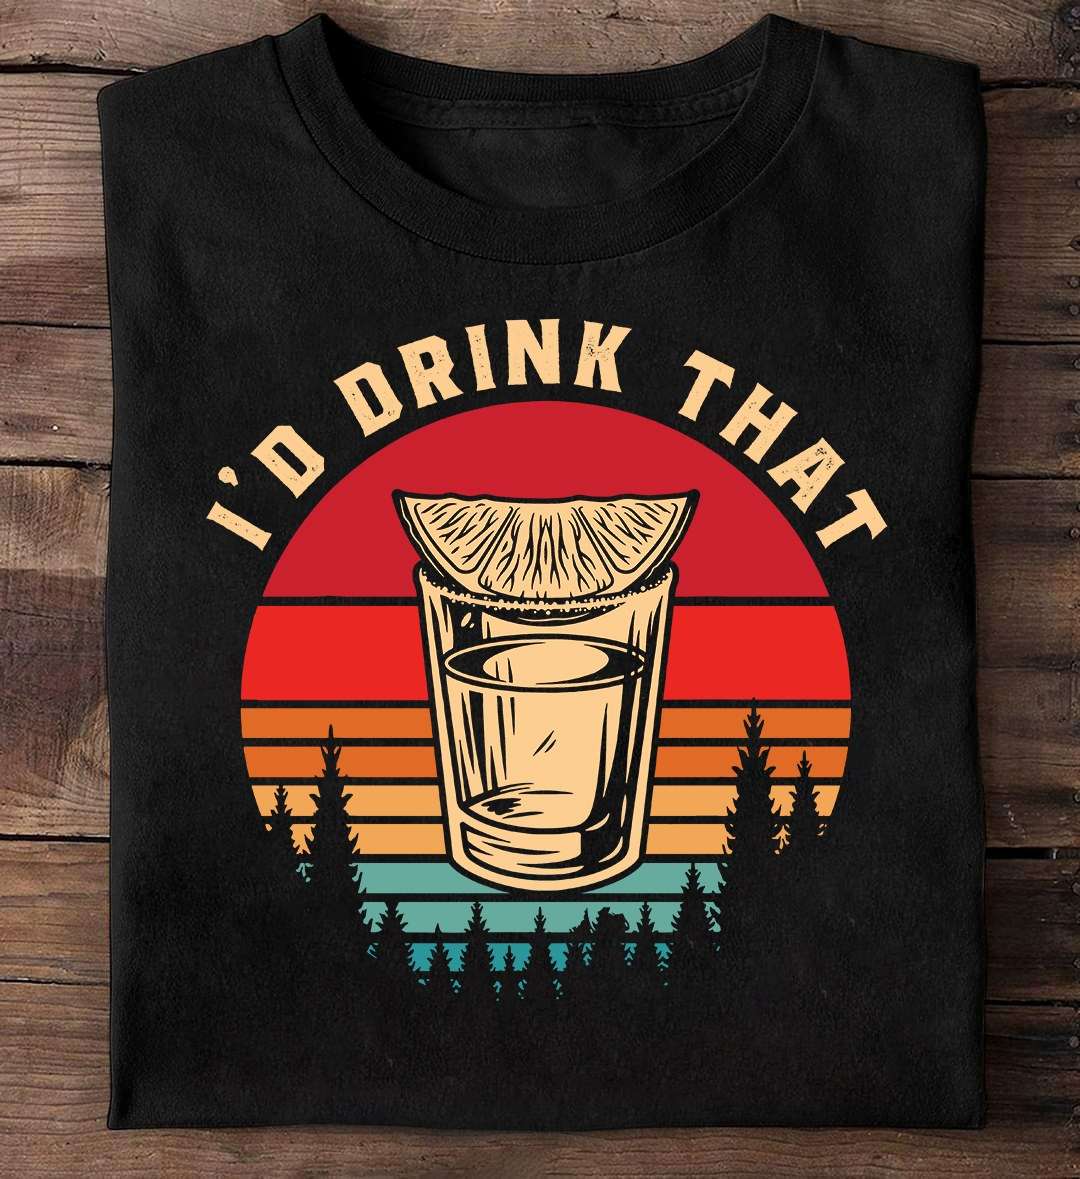 I'd drink that - Shot of wine, love drinking wine